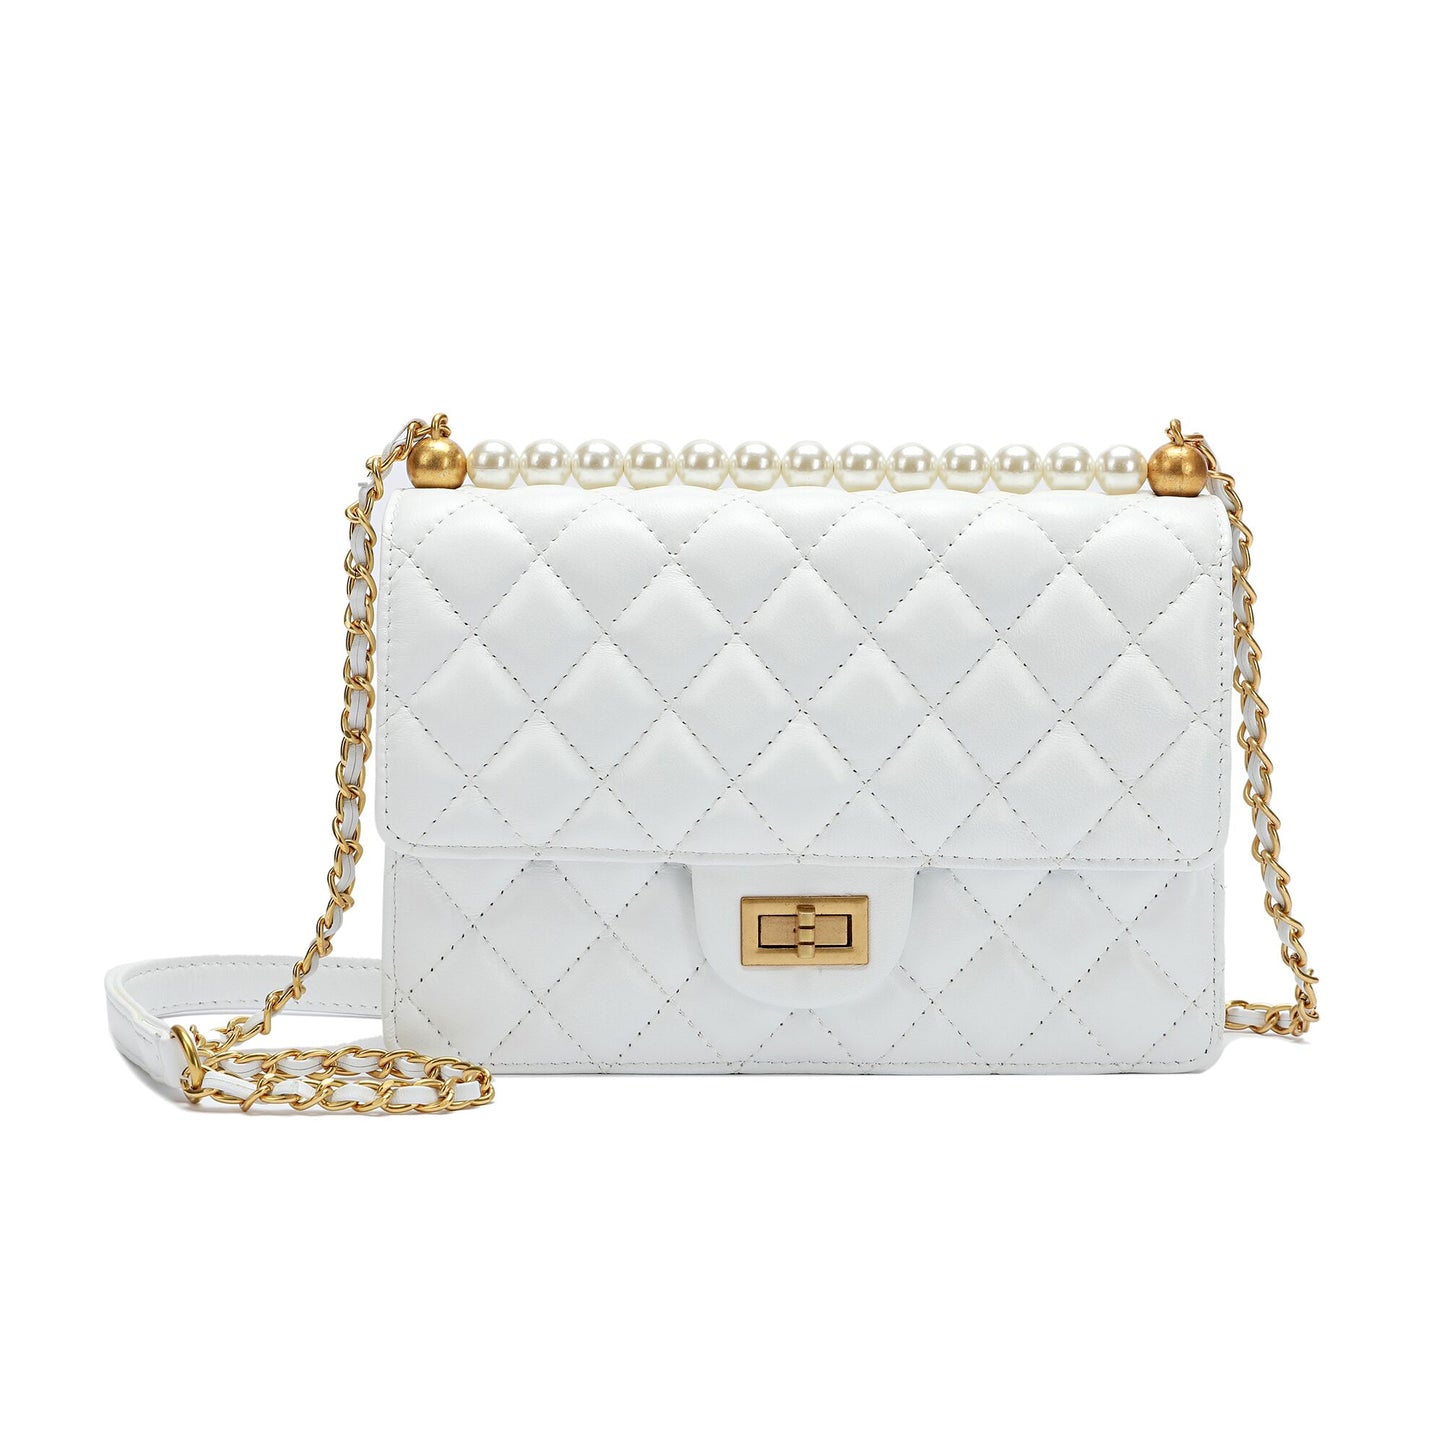 Full-grain Lambskin Leather Shoulder Bag Embellished With Faux Pearls